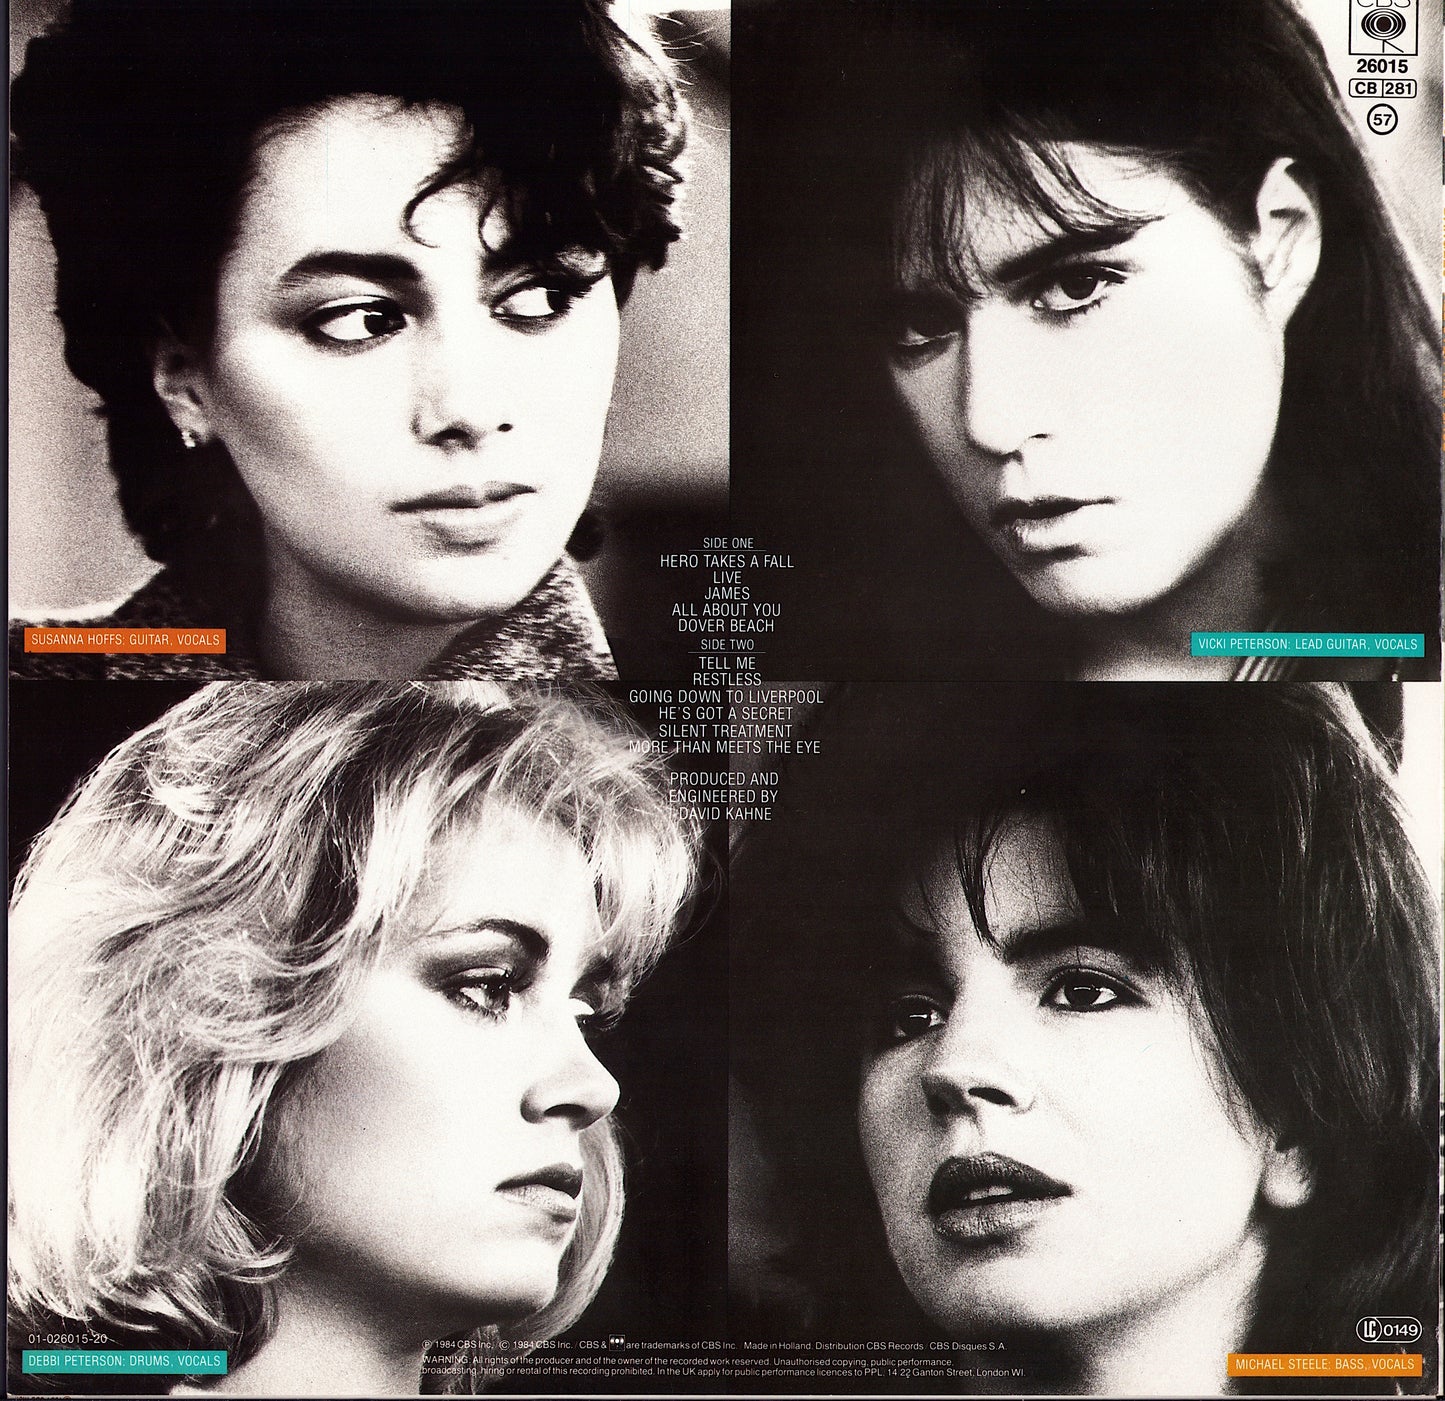 Bangles ‎- All Over The Place Vinyl LP